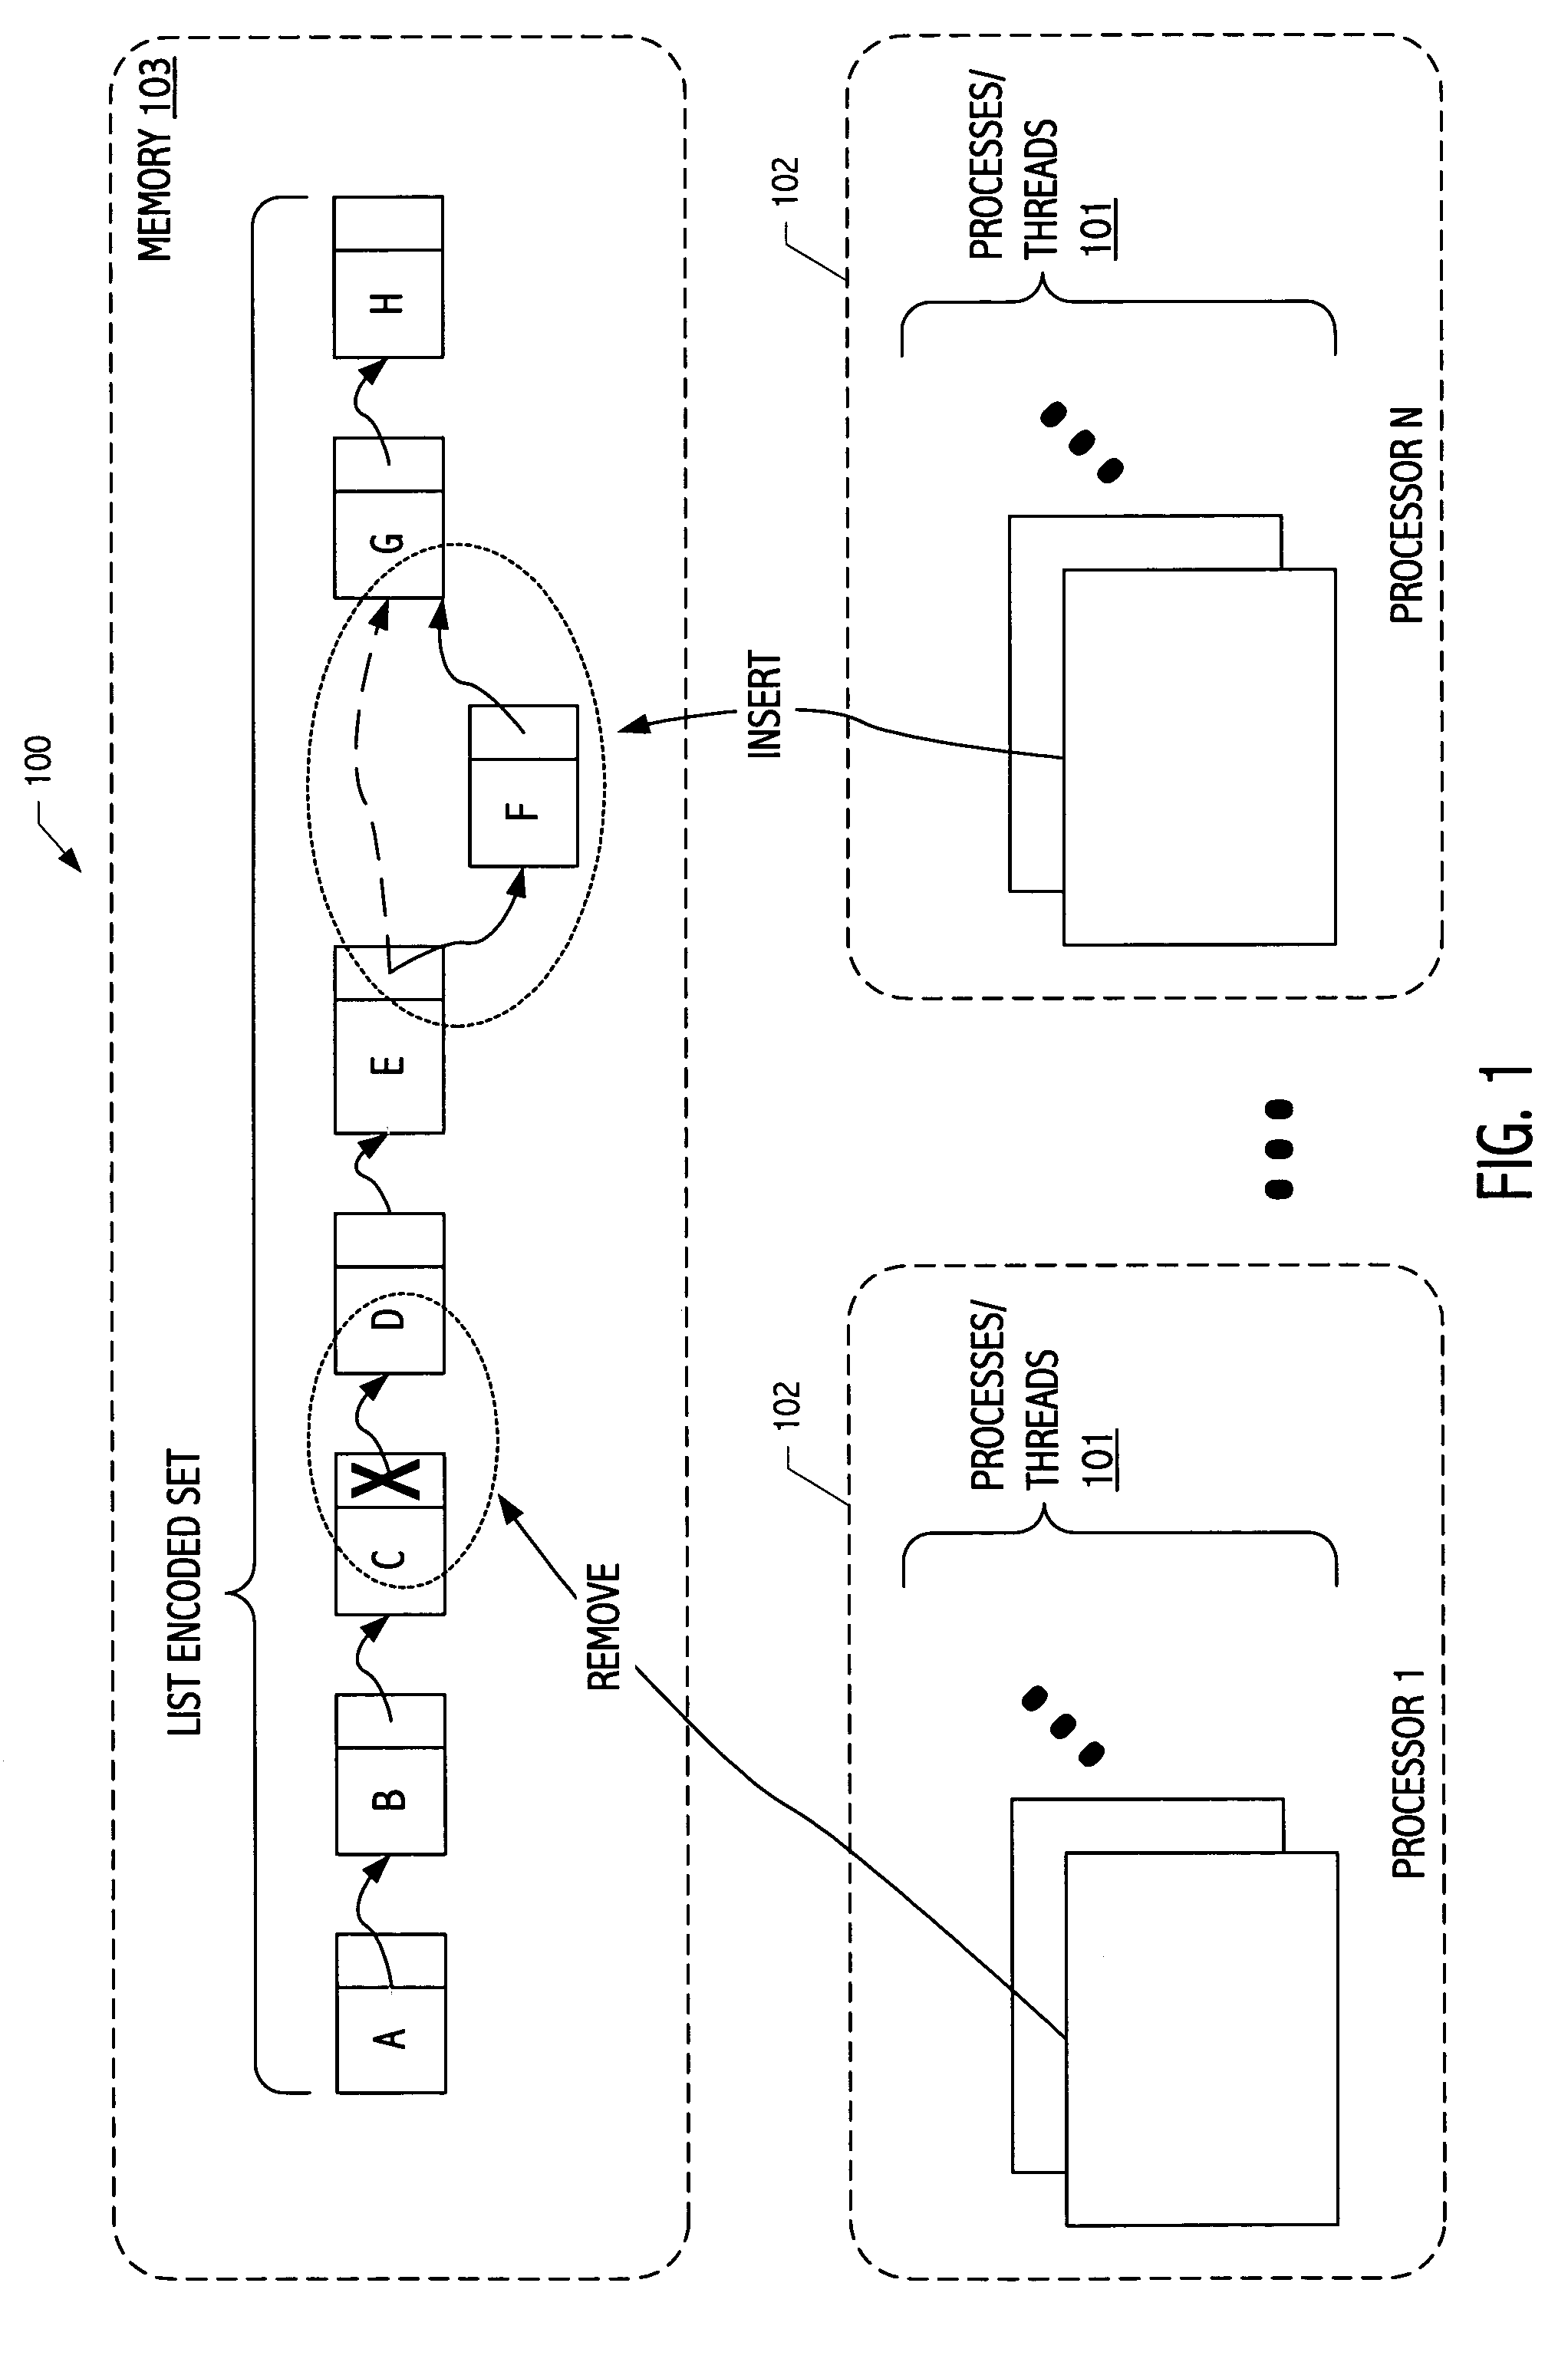 Linked-list implementation of a data structure with concurrent non-blocking insert and remove operations